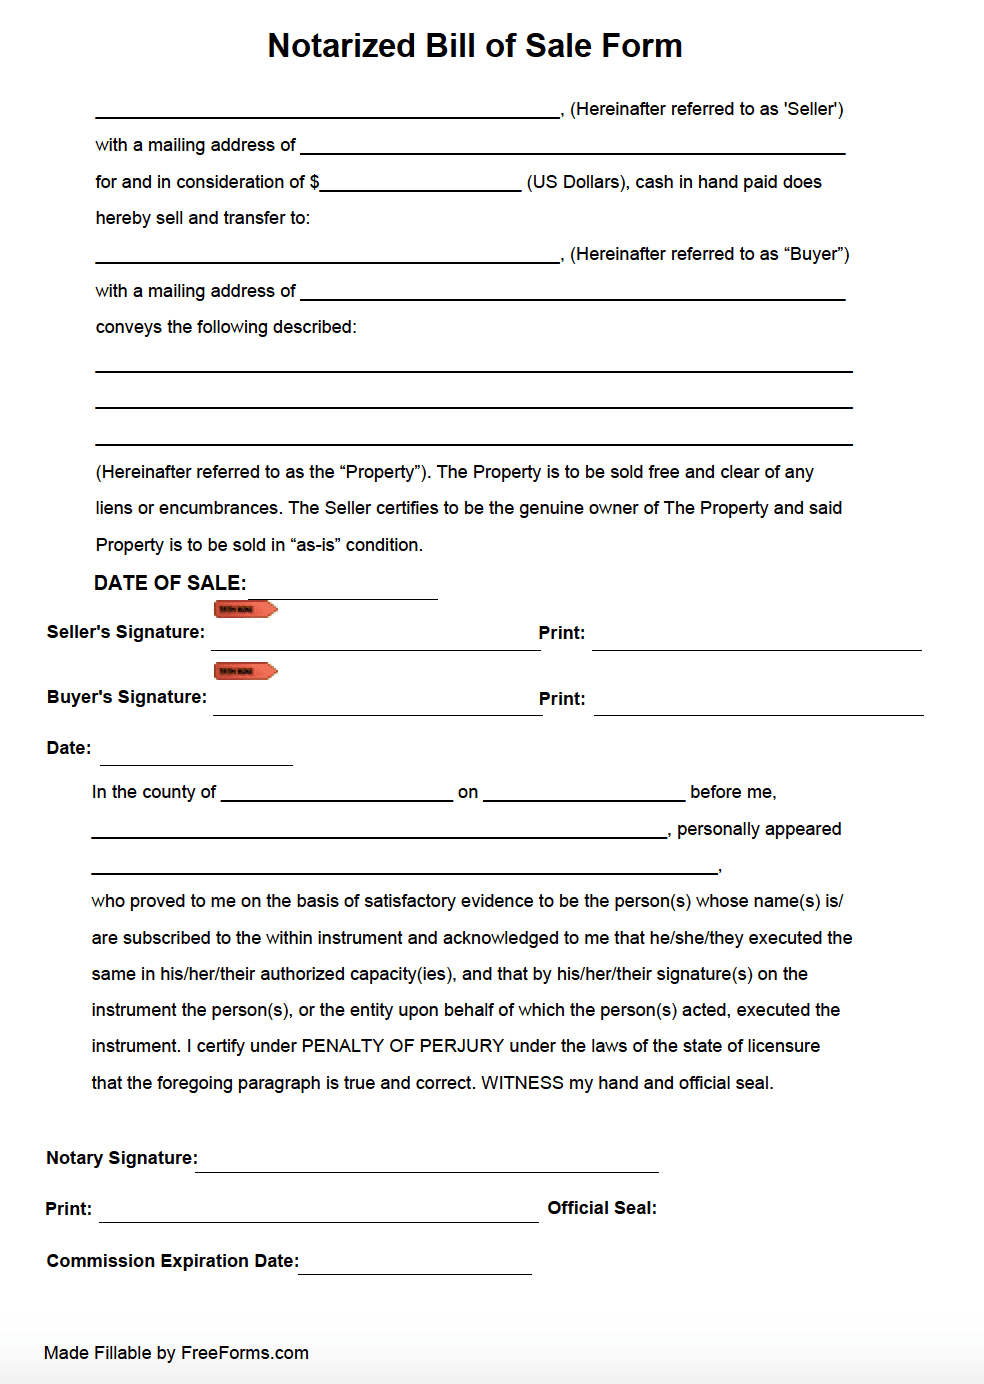 Free Notarized Bill of Sale Form  PDF Inside notarized payment agreement template